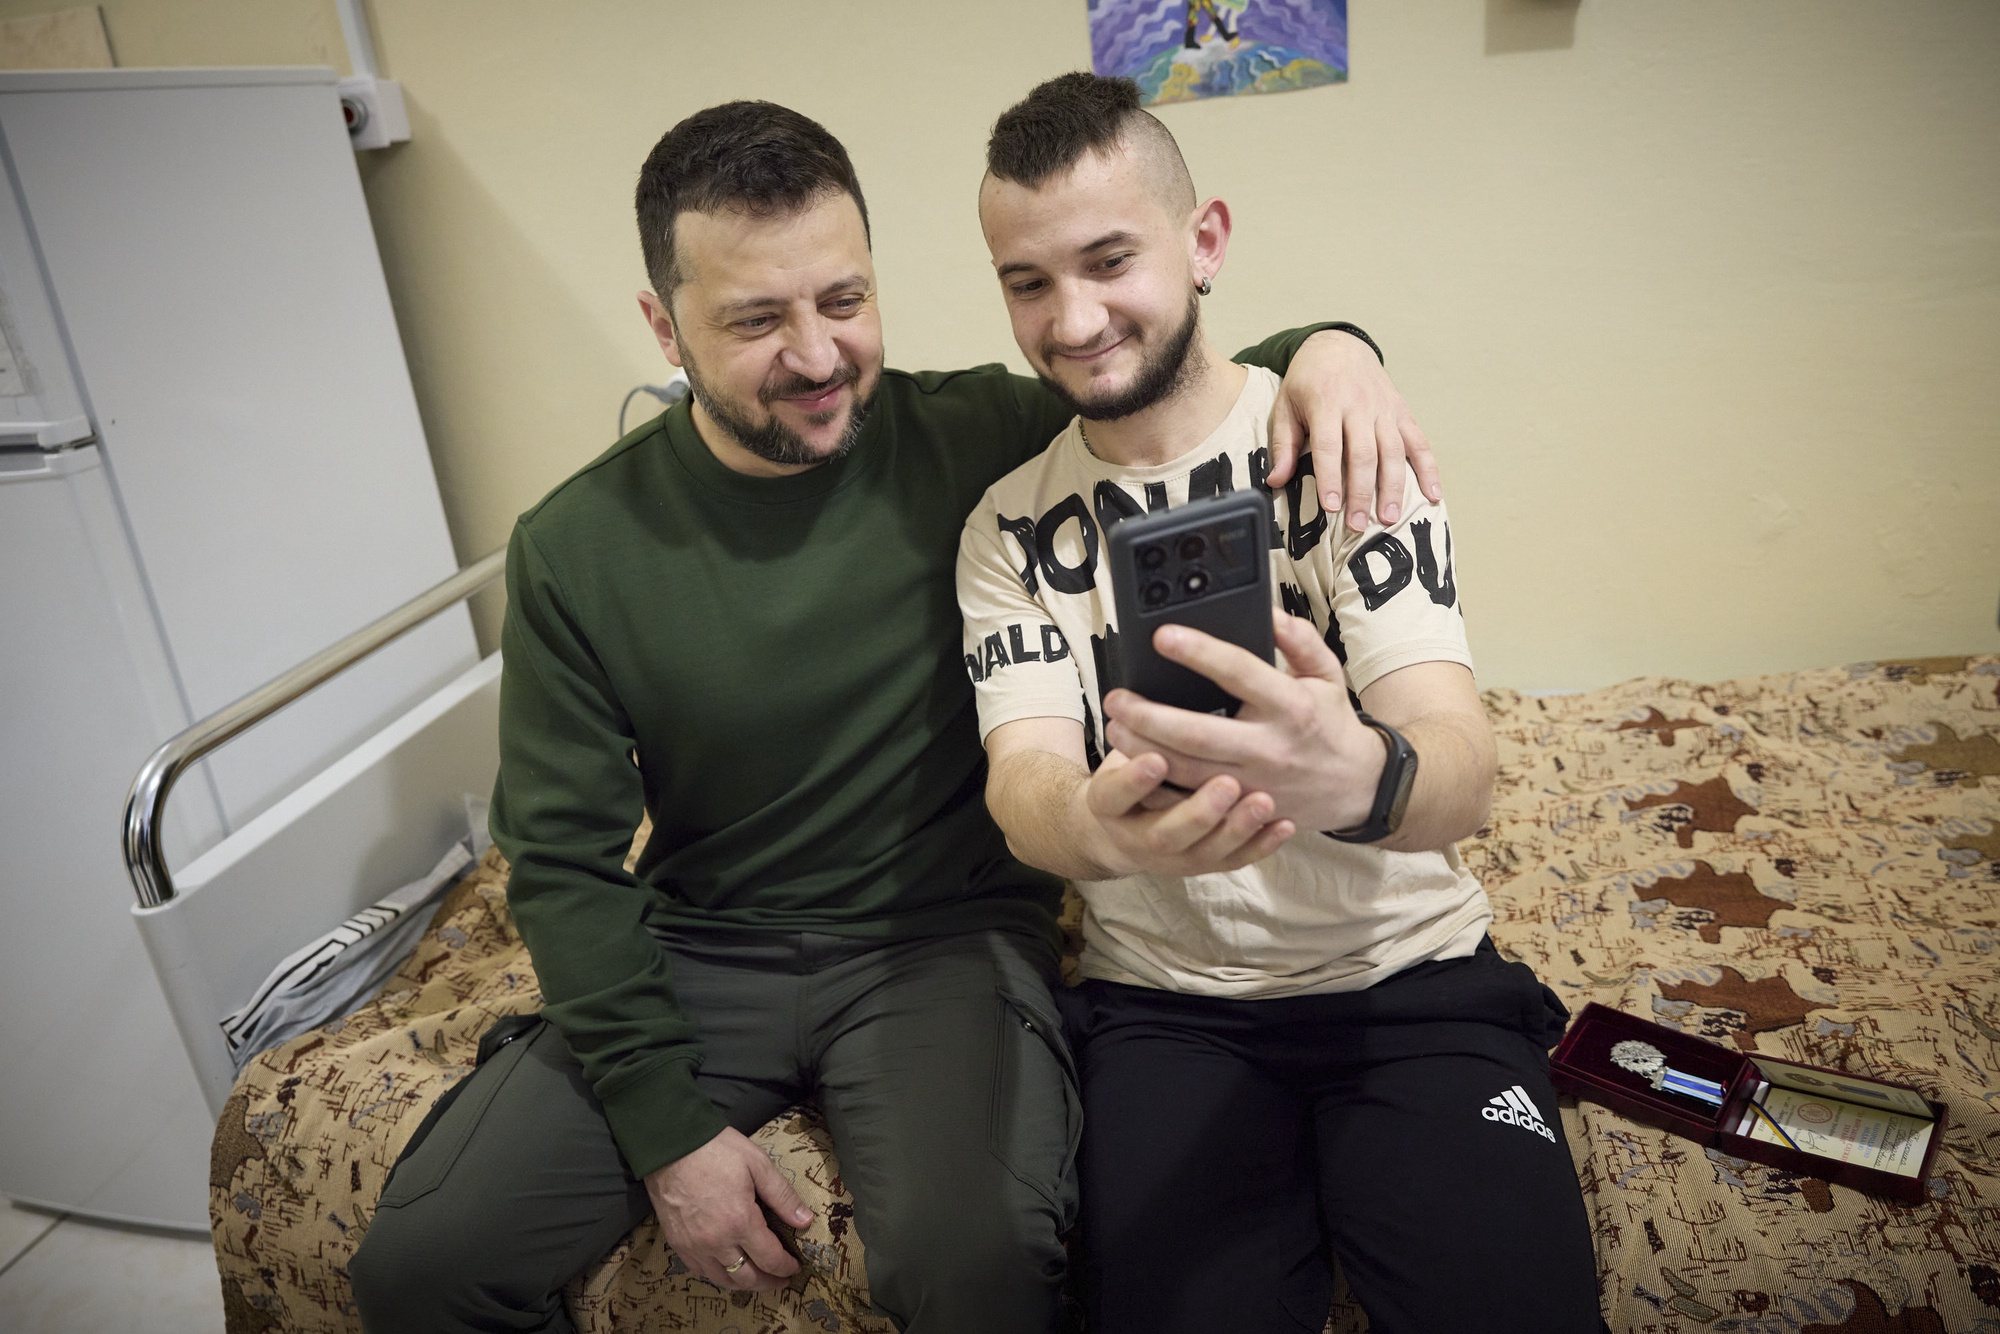 epa11247107 A handout picture made available by the Presidential Press Service shows Ukrainian President Volodymyr Zelensky (L) posing for a selfie with a wounded serviceman at a military hospital during a working visit to the Sumy region, Ukraine, 27 March 2024 amid the Russian invasion. Zelenskyy was briefed on the organization across three lines of defense and discussed the current needs for weapons and equipment. Russian troops entered Ukrainian territory on 24 February 2022, starting a conflict that has provoked destruction and a humanitarian crisis.  EPA/PRESIDENTIAL PRESS SERVICE HANDOUT   HANDOUT EDITORIAL USE ONLY/NO SALES HANDOUT EDITORIAL USE ONLY/NO SALES